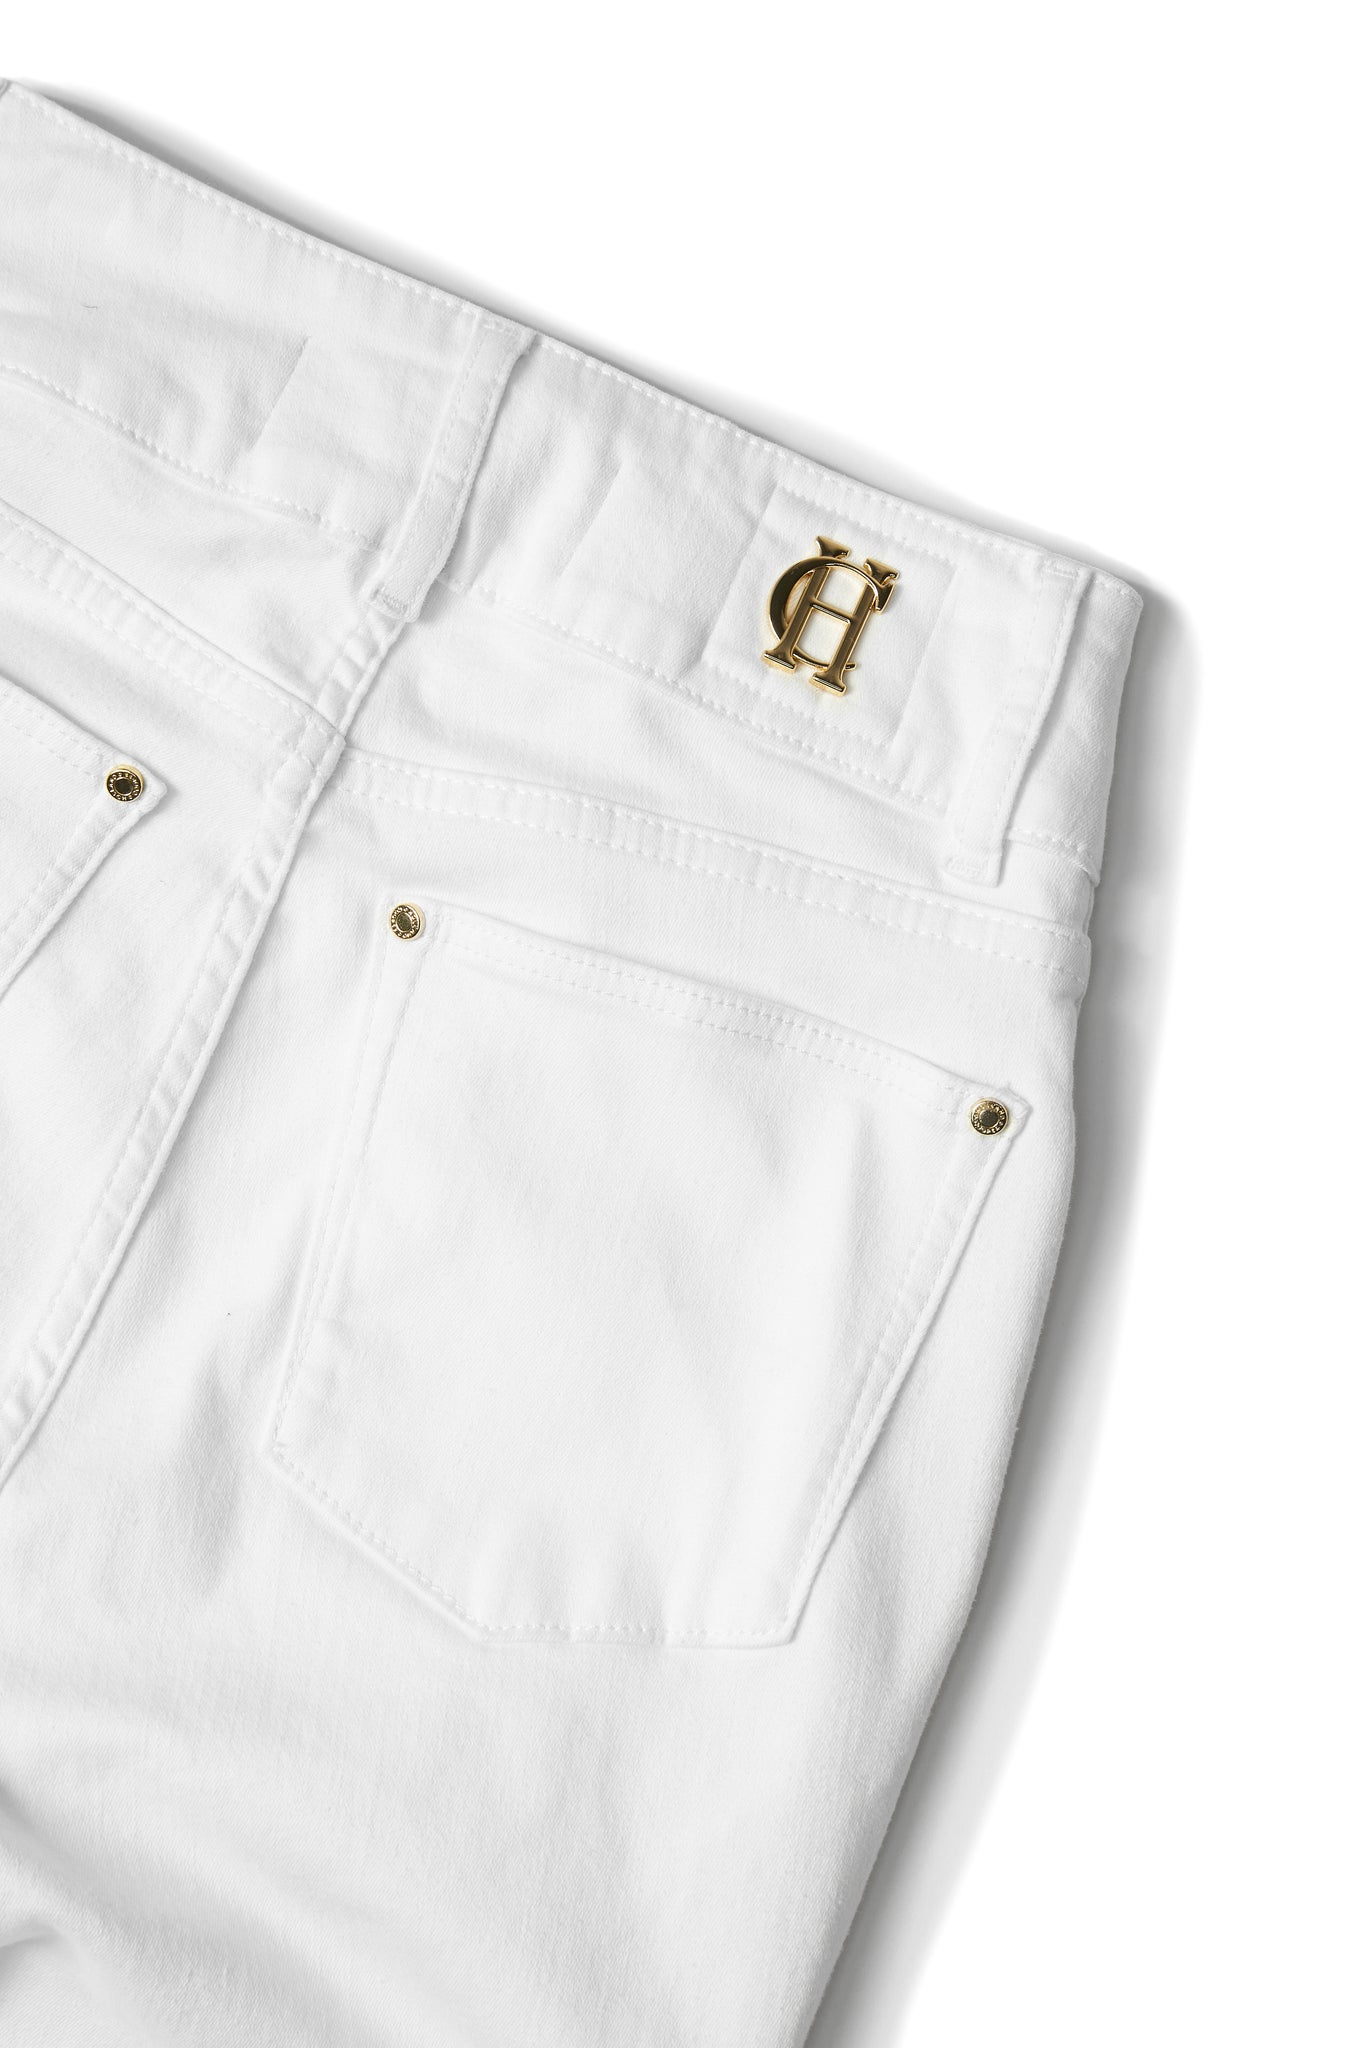 gold hardware detail on back waistband on womens high rise white flared jean with centre front zip fly fastening with two open pockets at the front and back